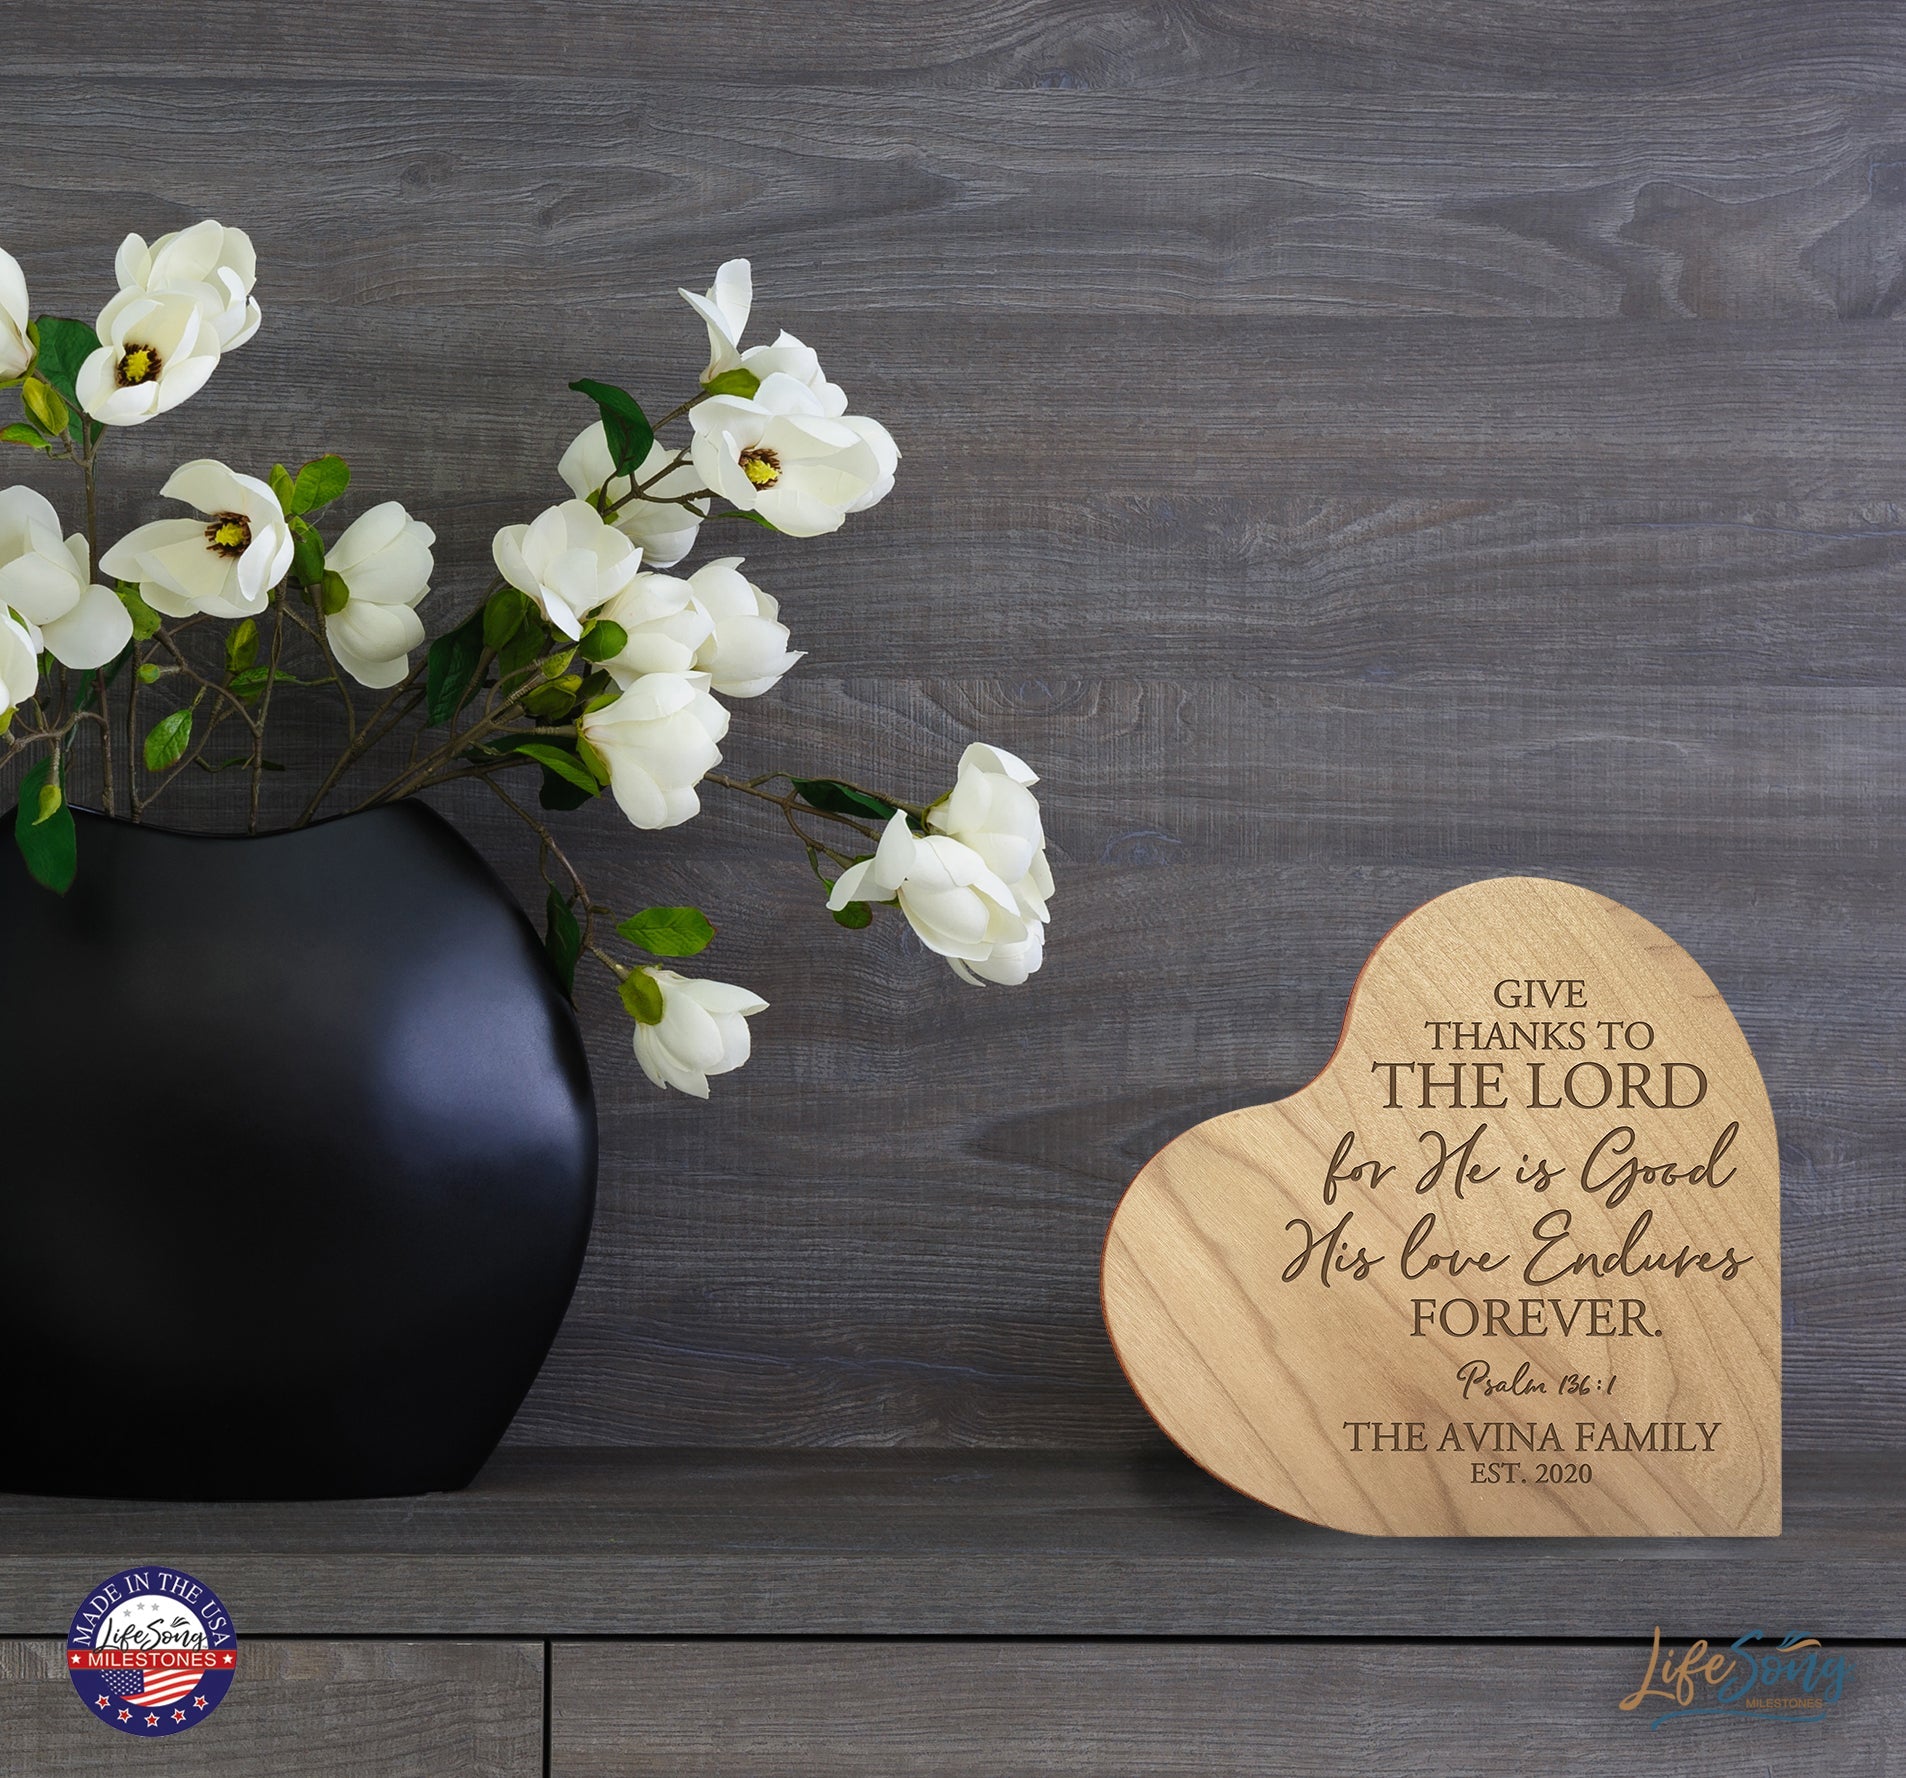 Personalized Engraved Wooden Inspirational Heart Block 5” x 5.25” x 0.75” - Give Thanks To The Lord - LifeSong Milestones